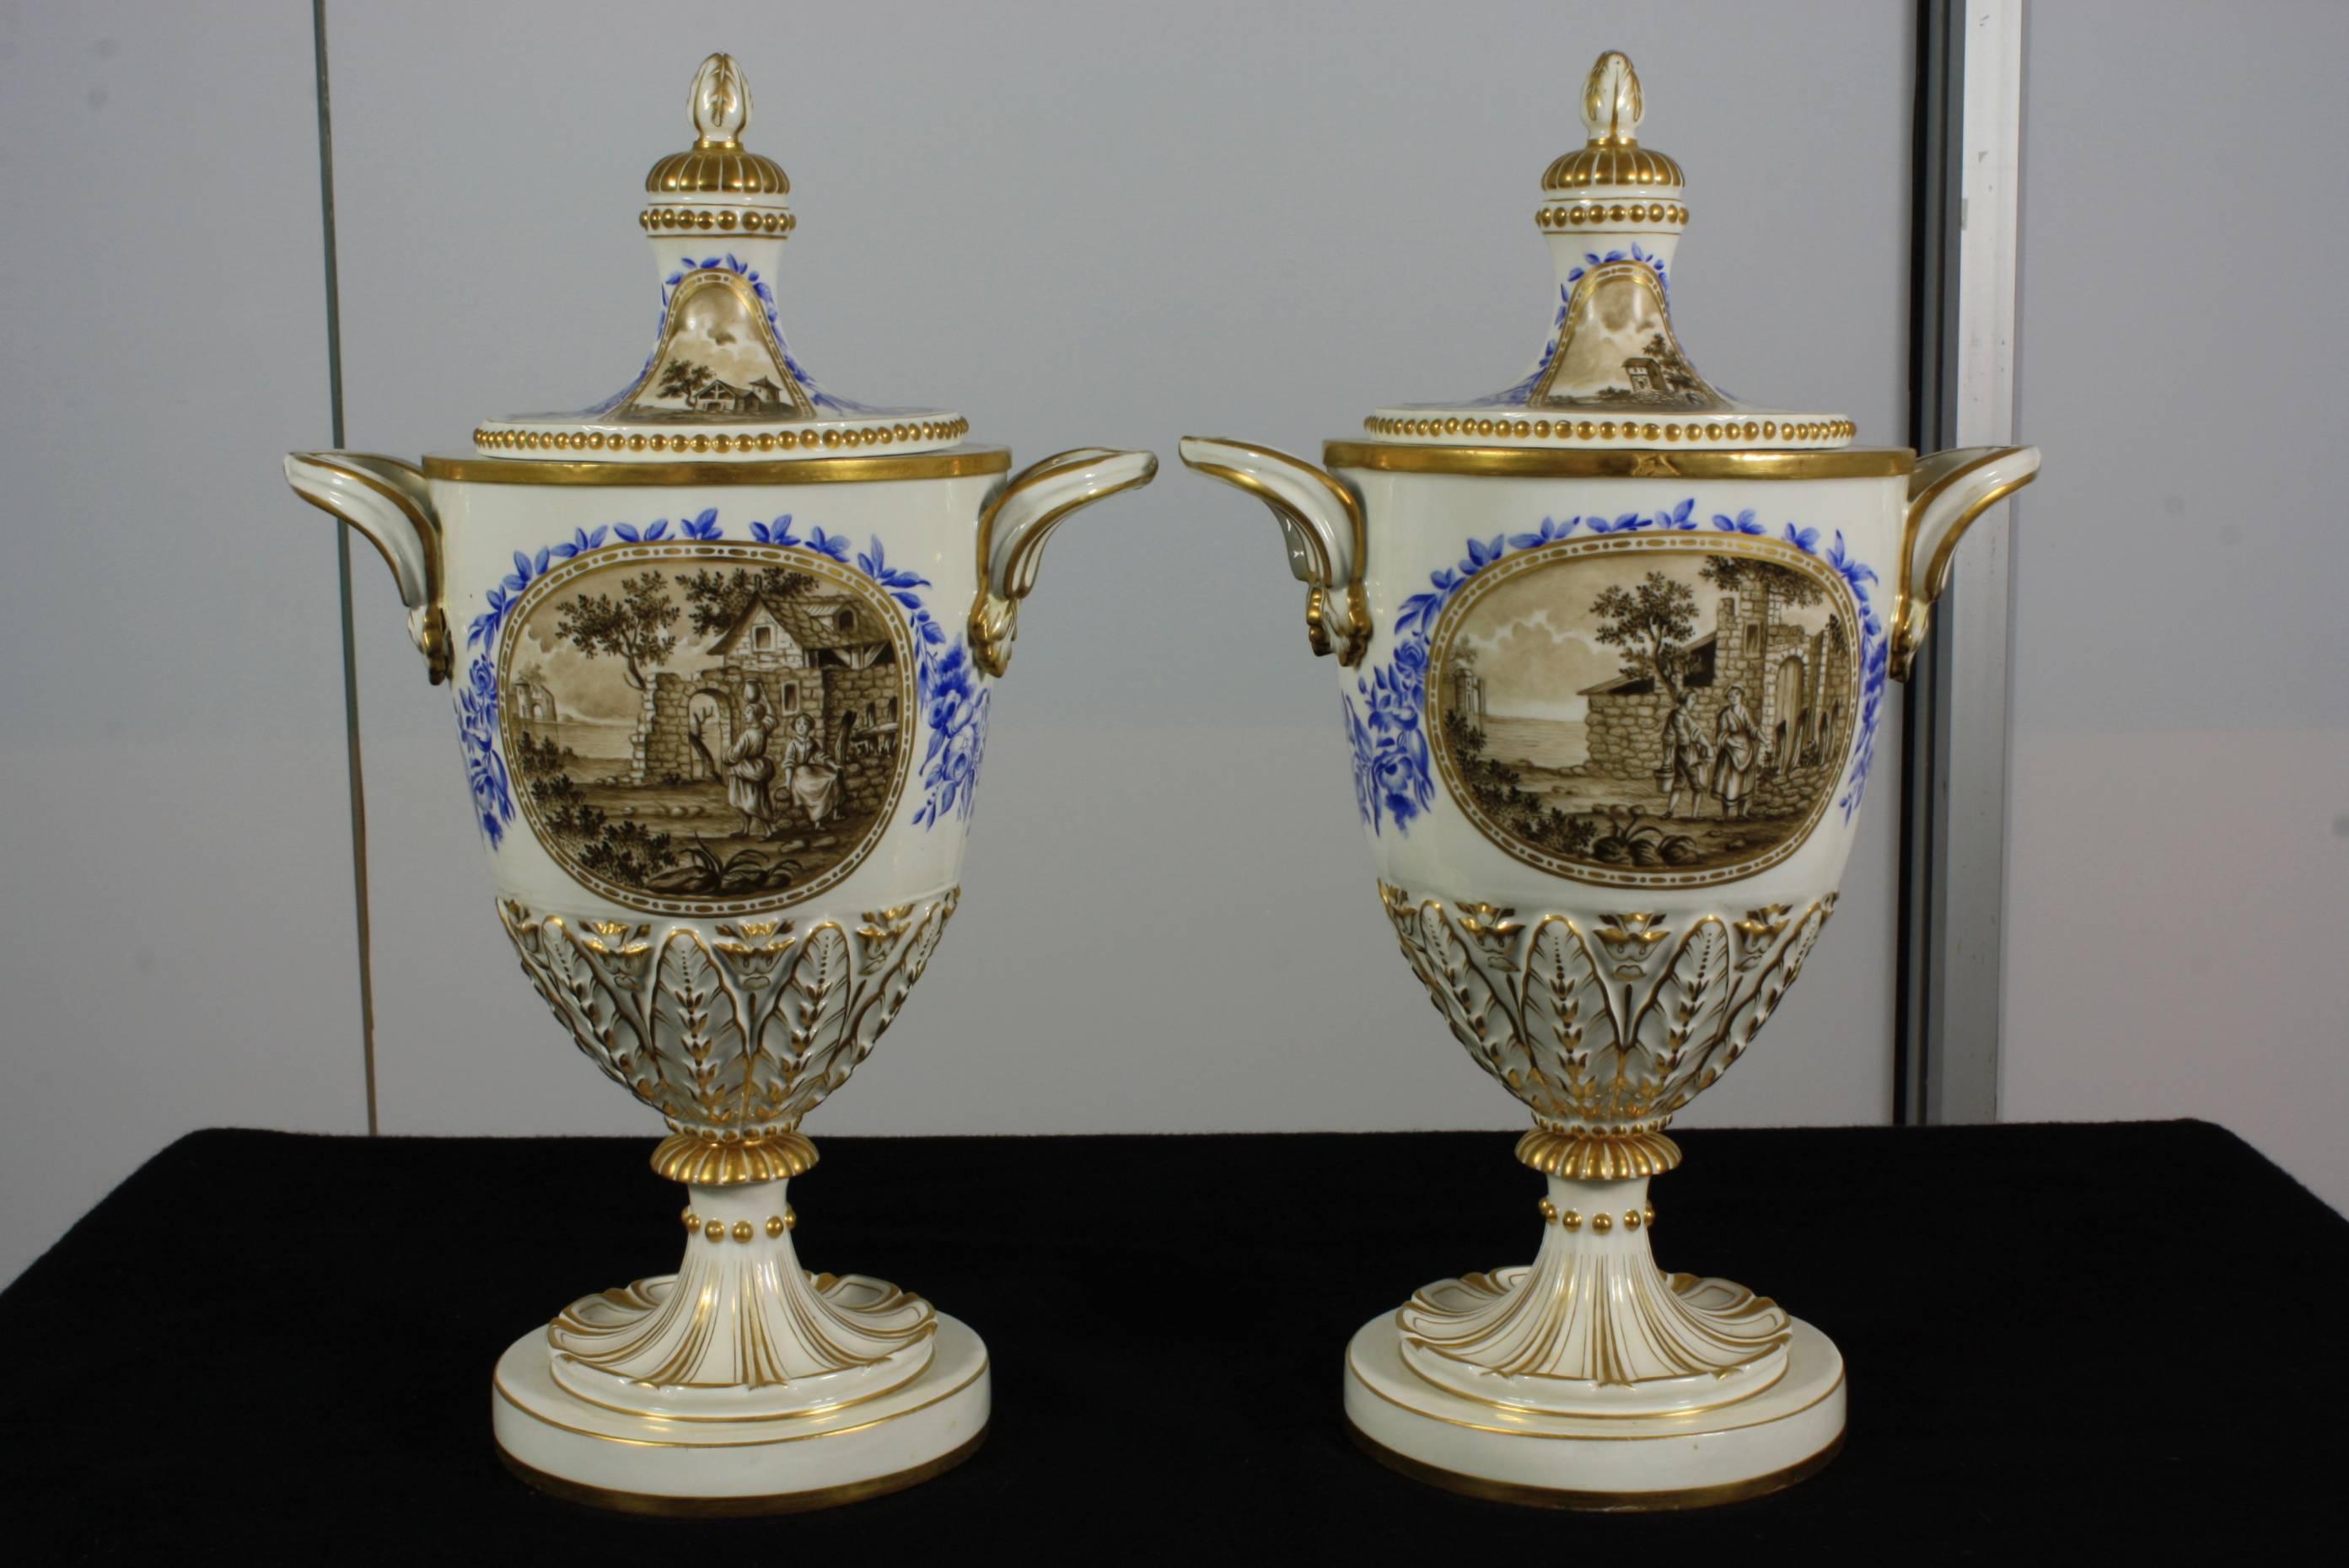 Pair of elegant 19th century Italian porcelain lidded urns with hand-painted scenes and gilded details. One side of the urns features a neoclassical scene, and the reverse side features a bucolic scene. Each of the painted scenes is framed by a